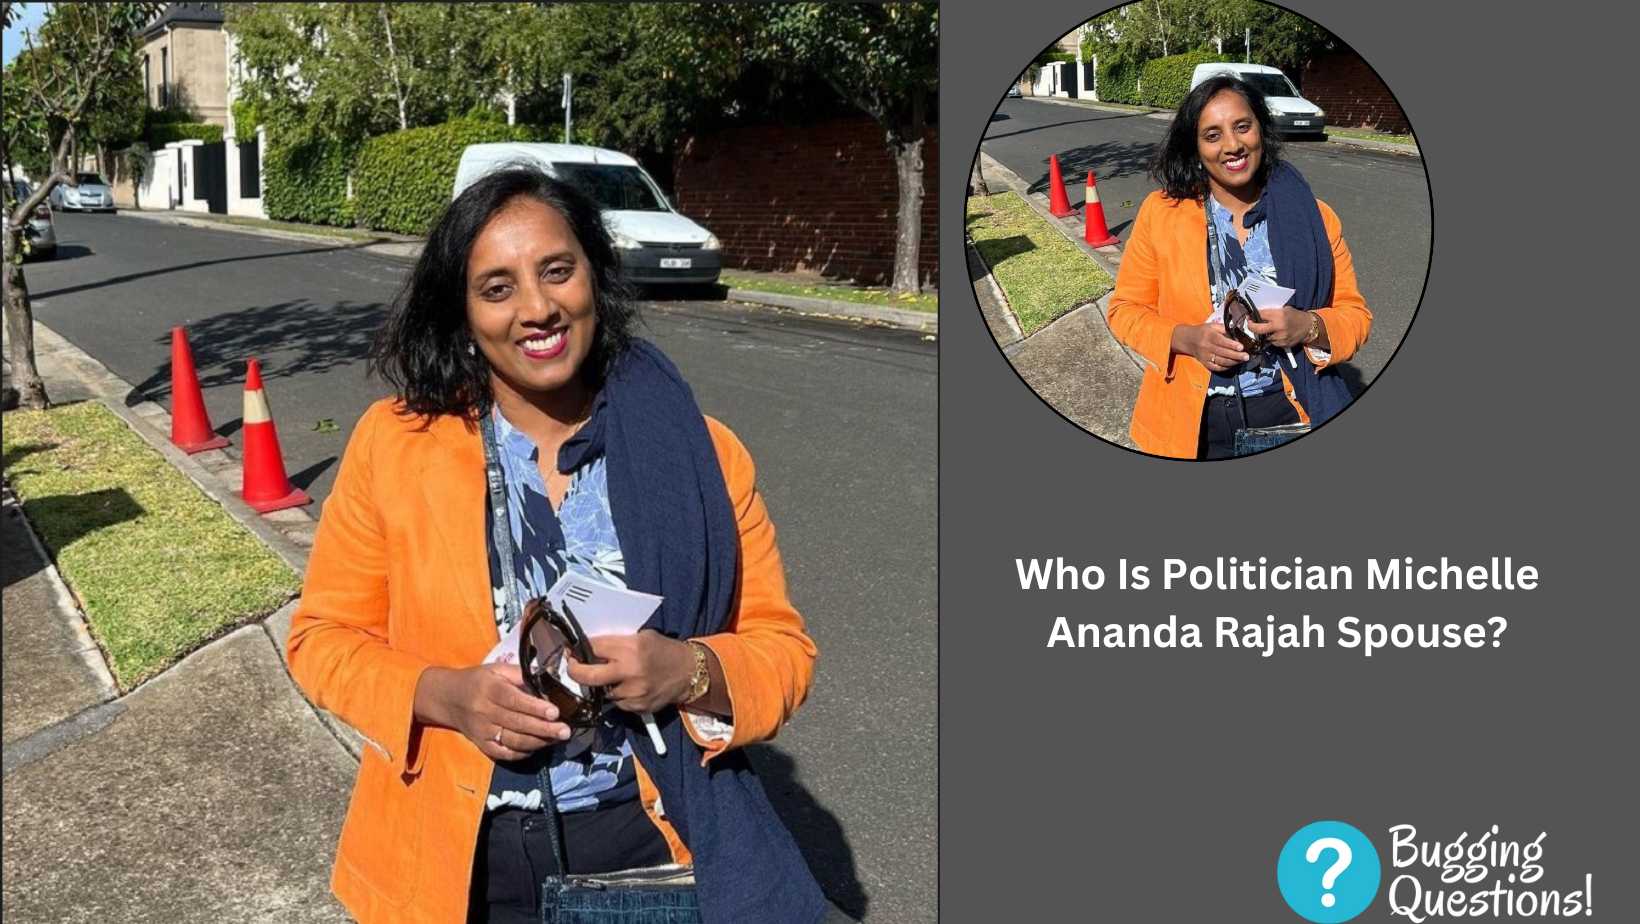 Who Is Politician Michelle Ananda Rajah Spouse?